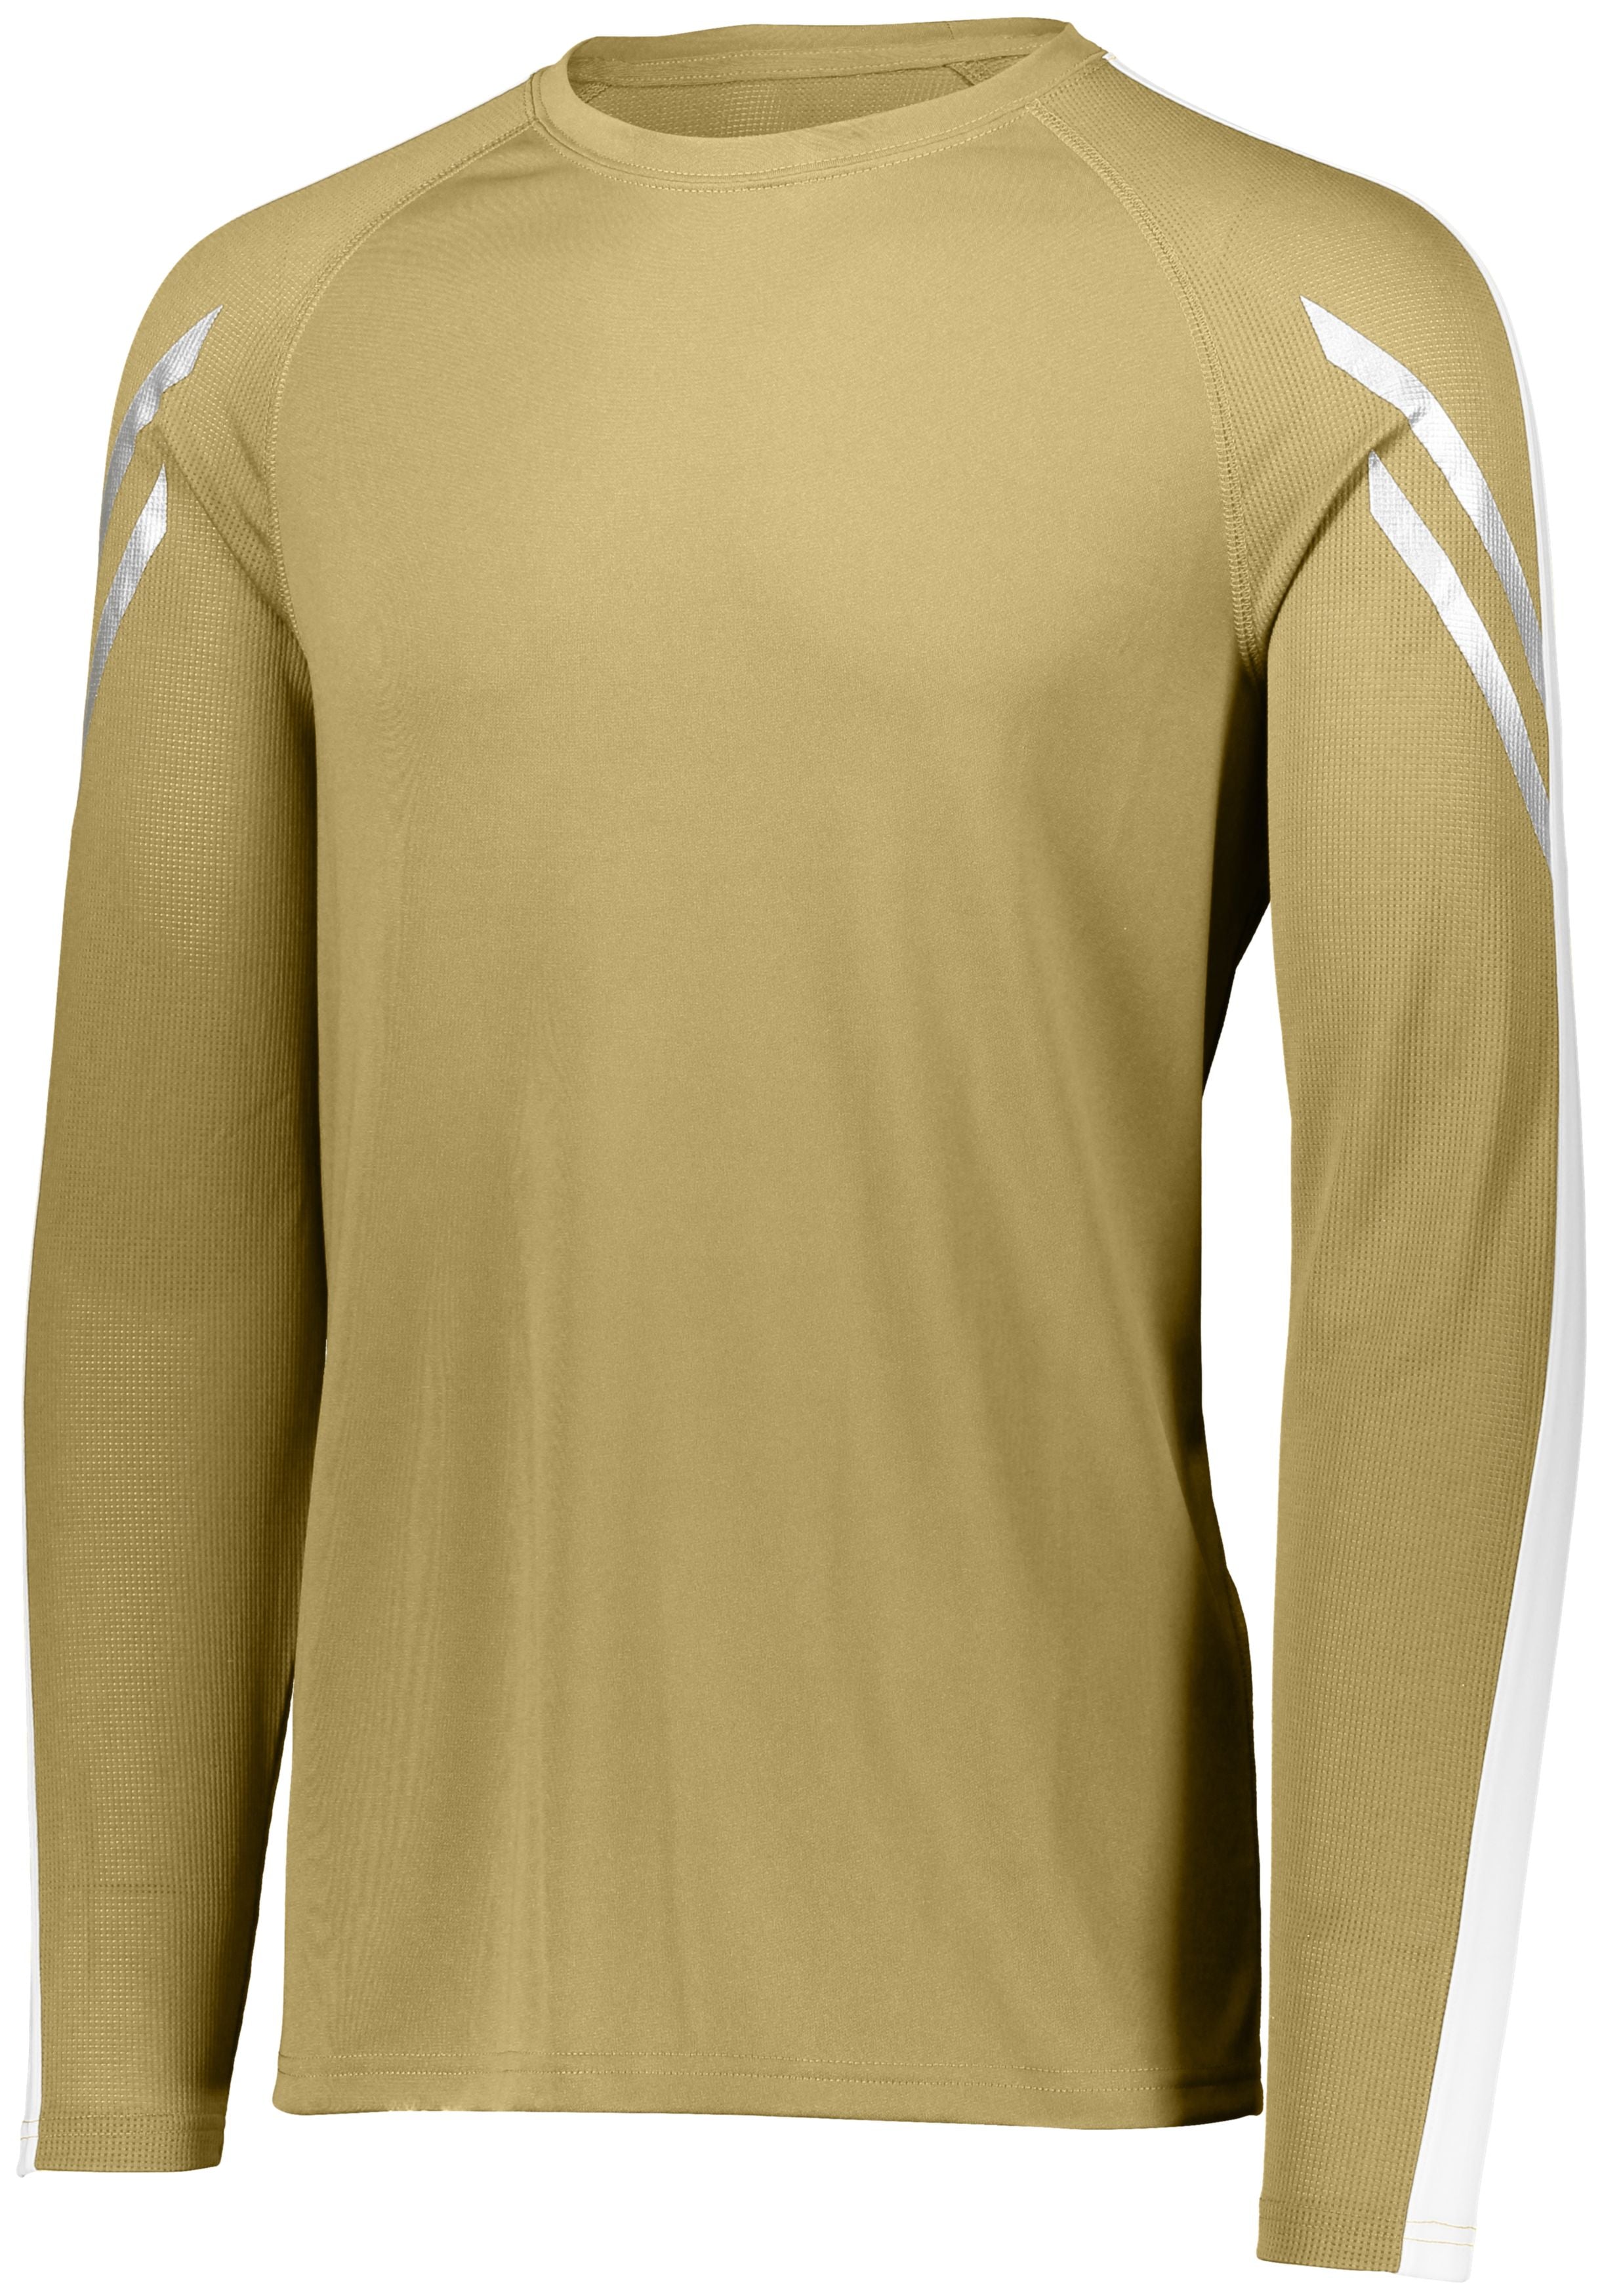 Holloway Flux Shirt Long Sleeve in Vegas Gold/White  -Part of the Adult, Holloway, Shirts, Flux-Collection product lines at KanaleyCreations.com